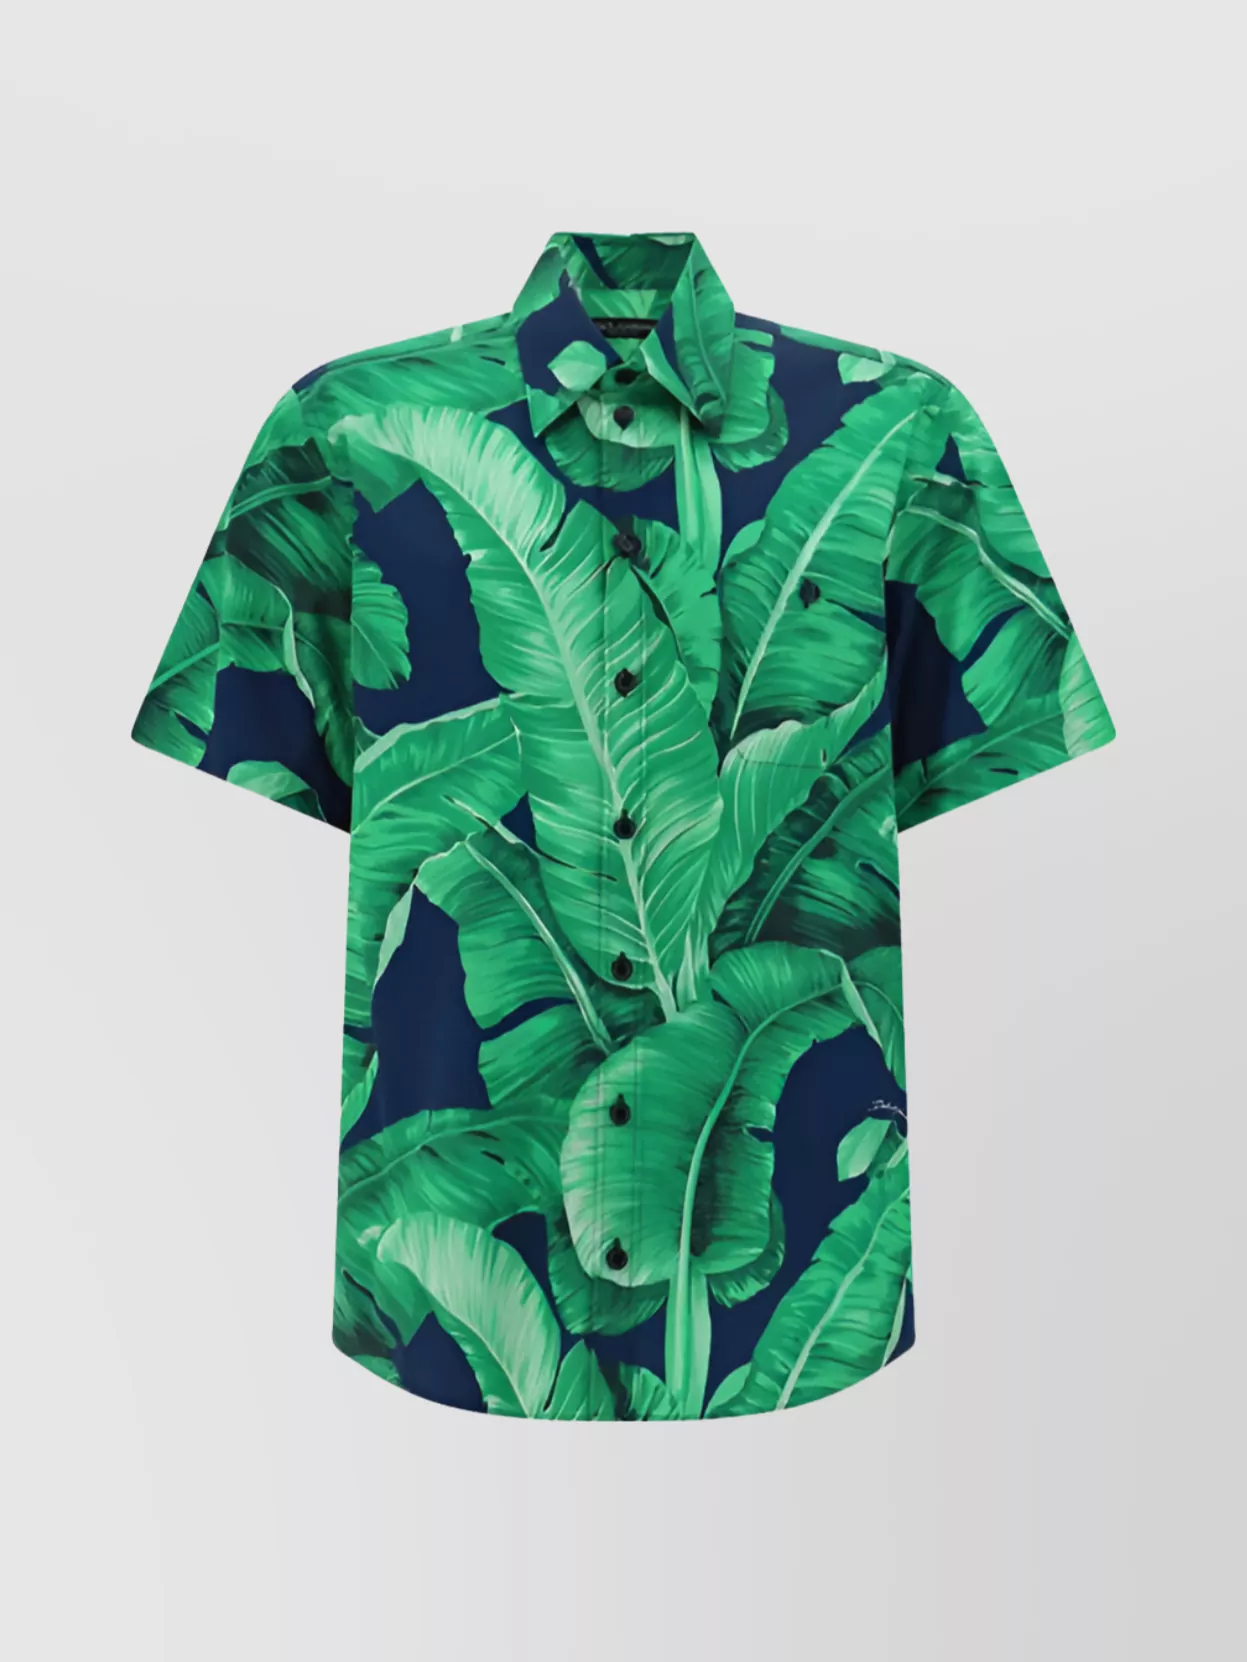 Dolce & Gabbana Multicolored Floral Print Shirt In Green